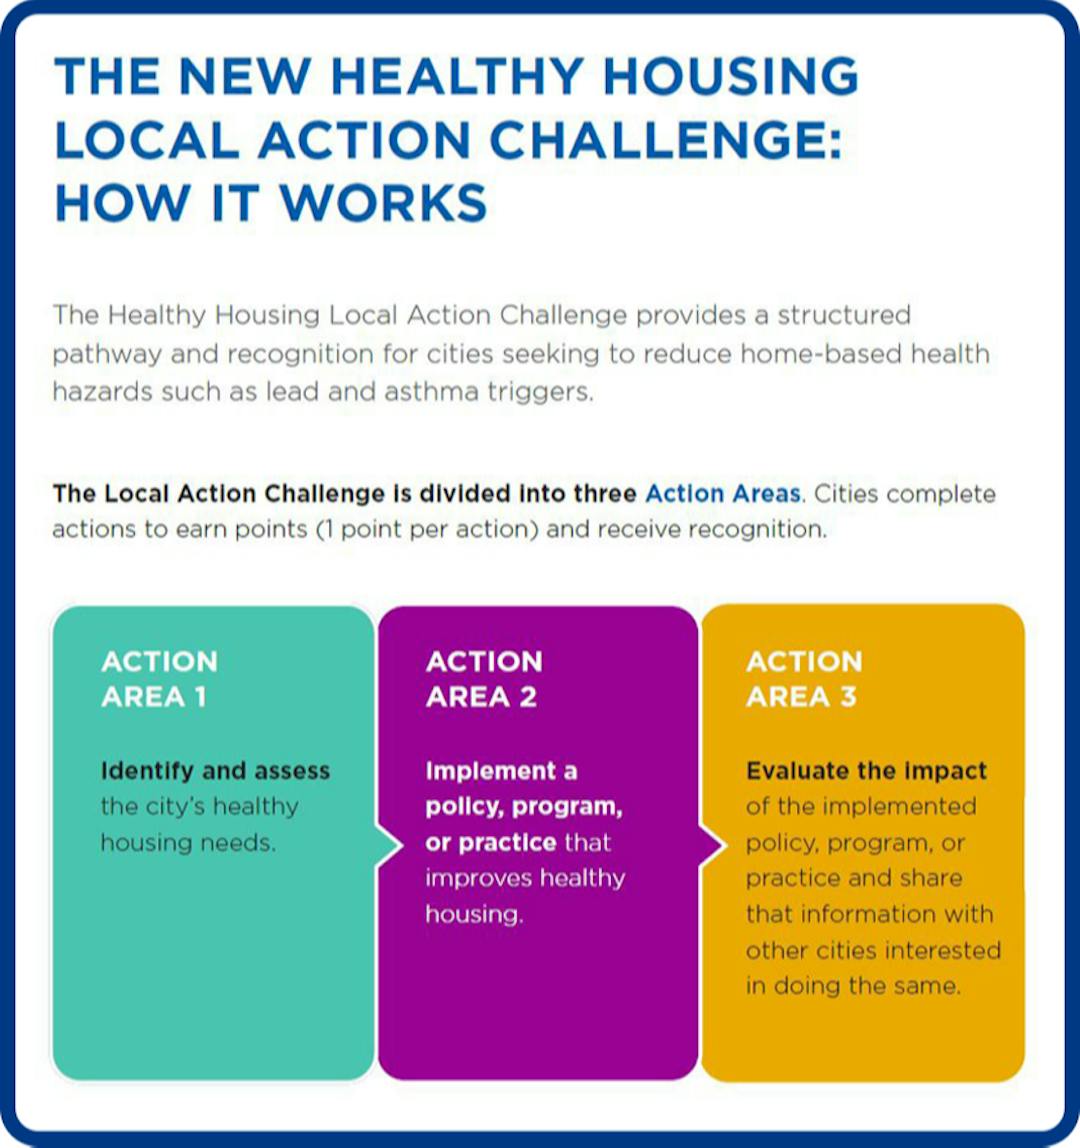 A graphic with information related to the new healthy housing local action challenge